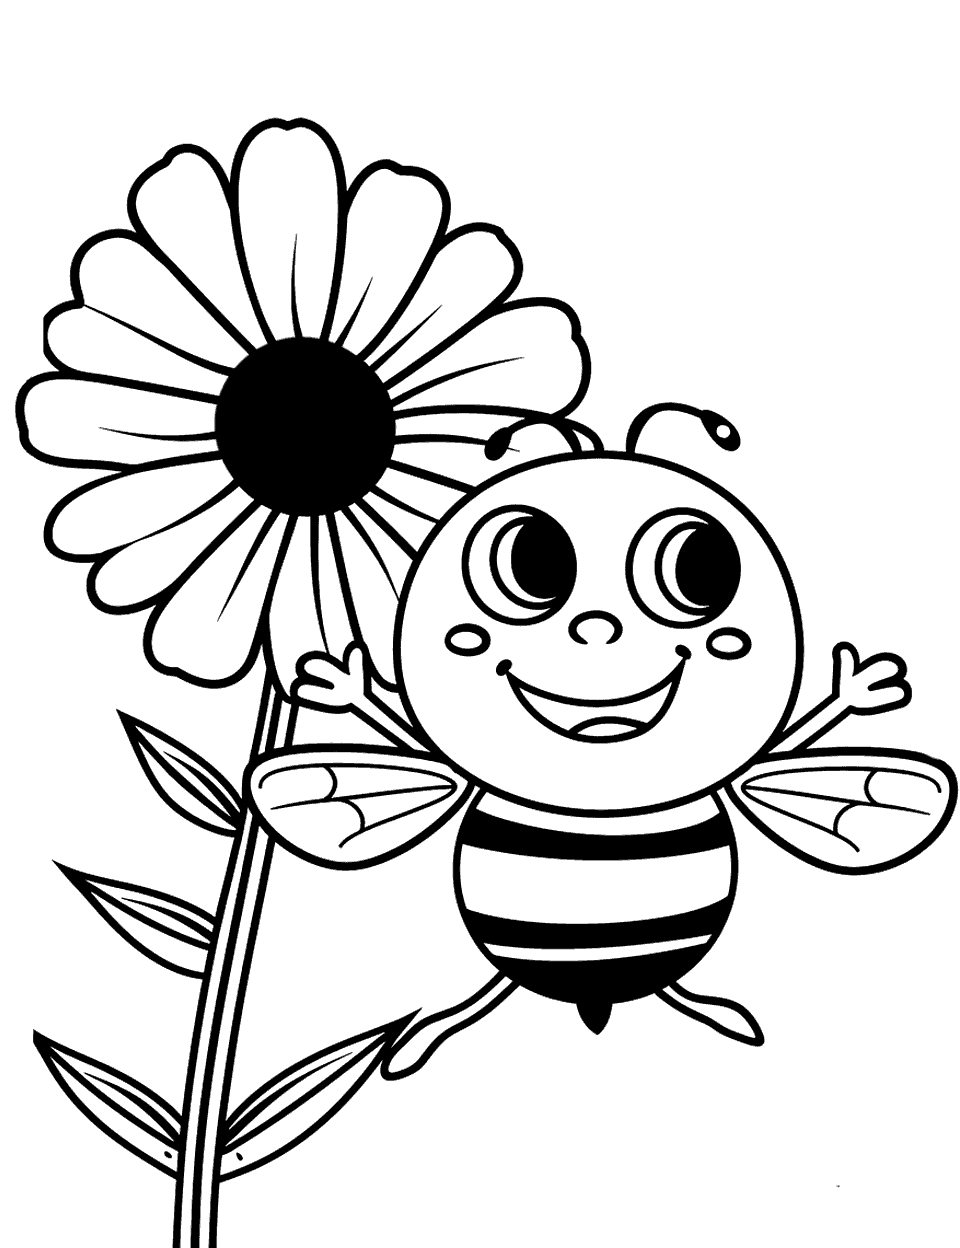 Kawaii Bee and Flower Coloring Page - A cute, stylized (kawaii) bee hovering near a big flower.